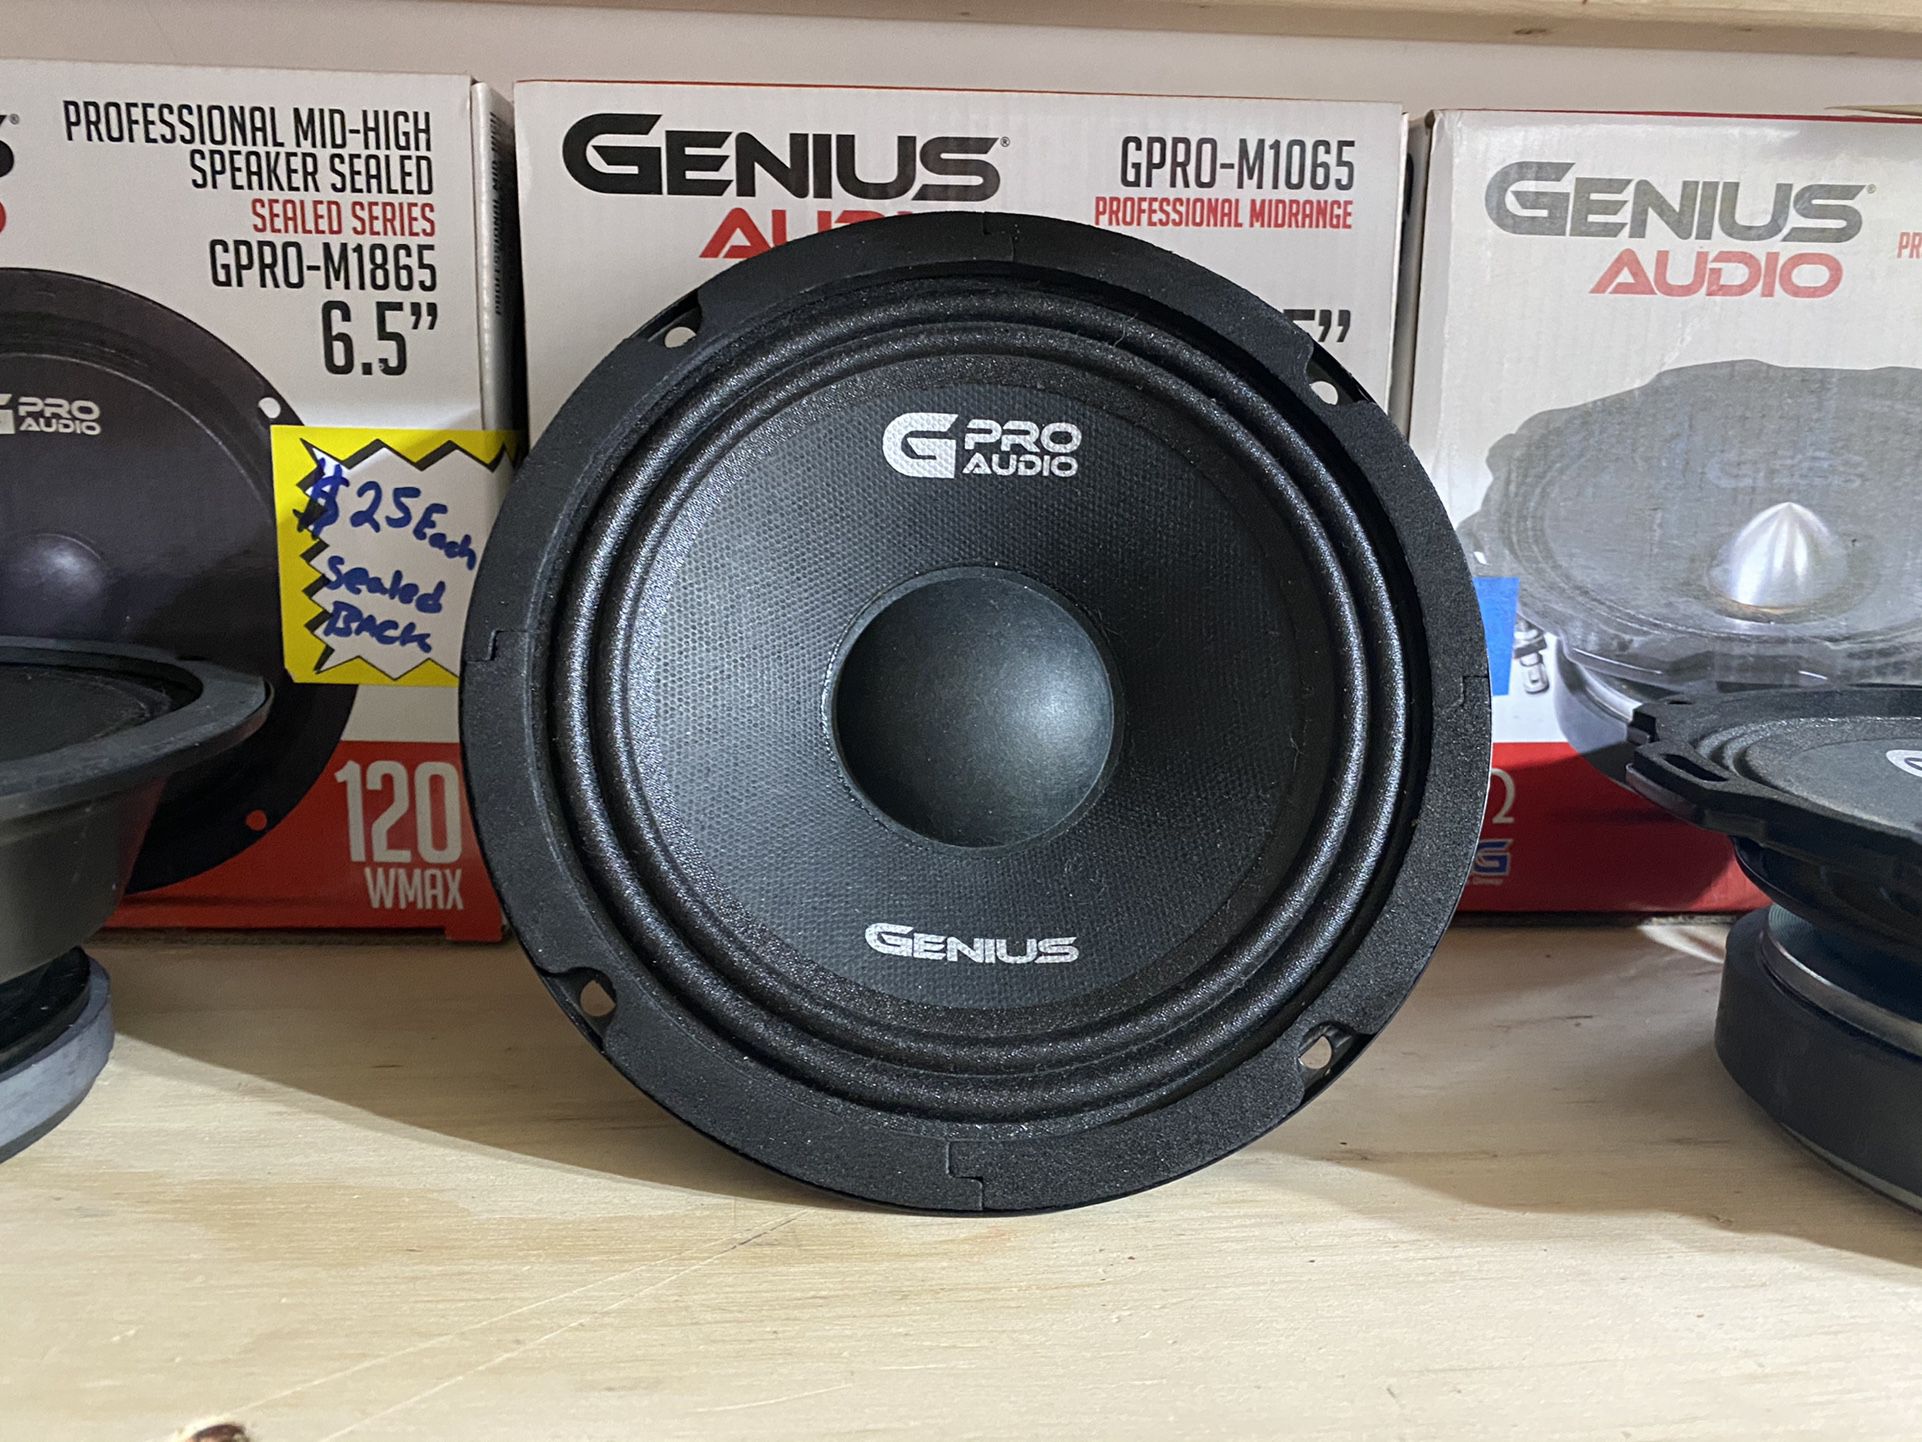 Sold Out More On The Way New 6.5" Genius Audio Midrange Speaker $30 Each  